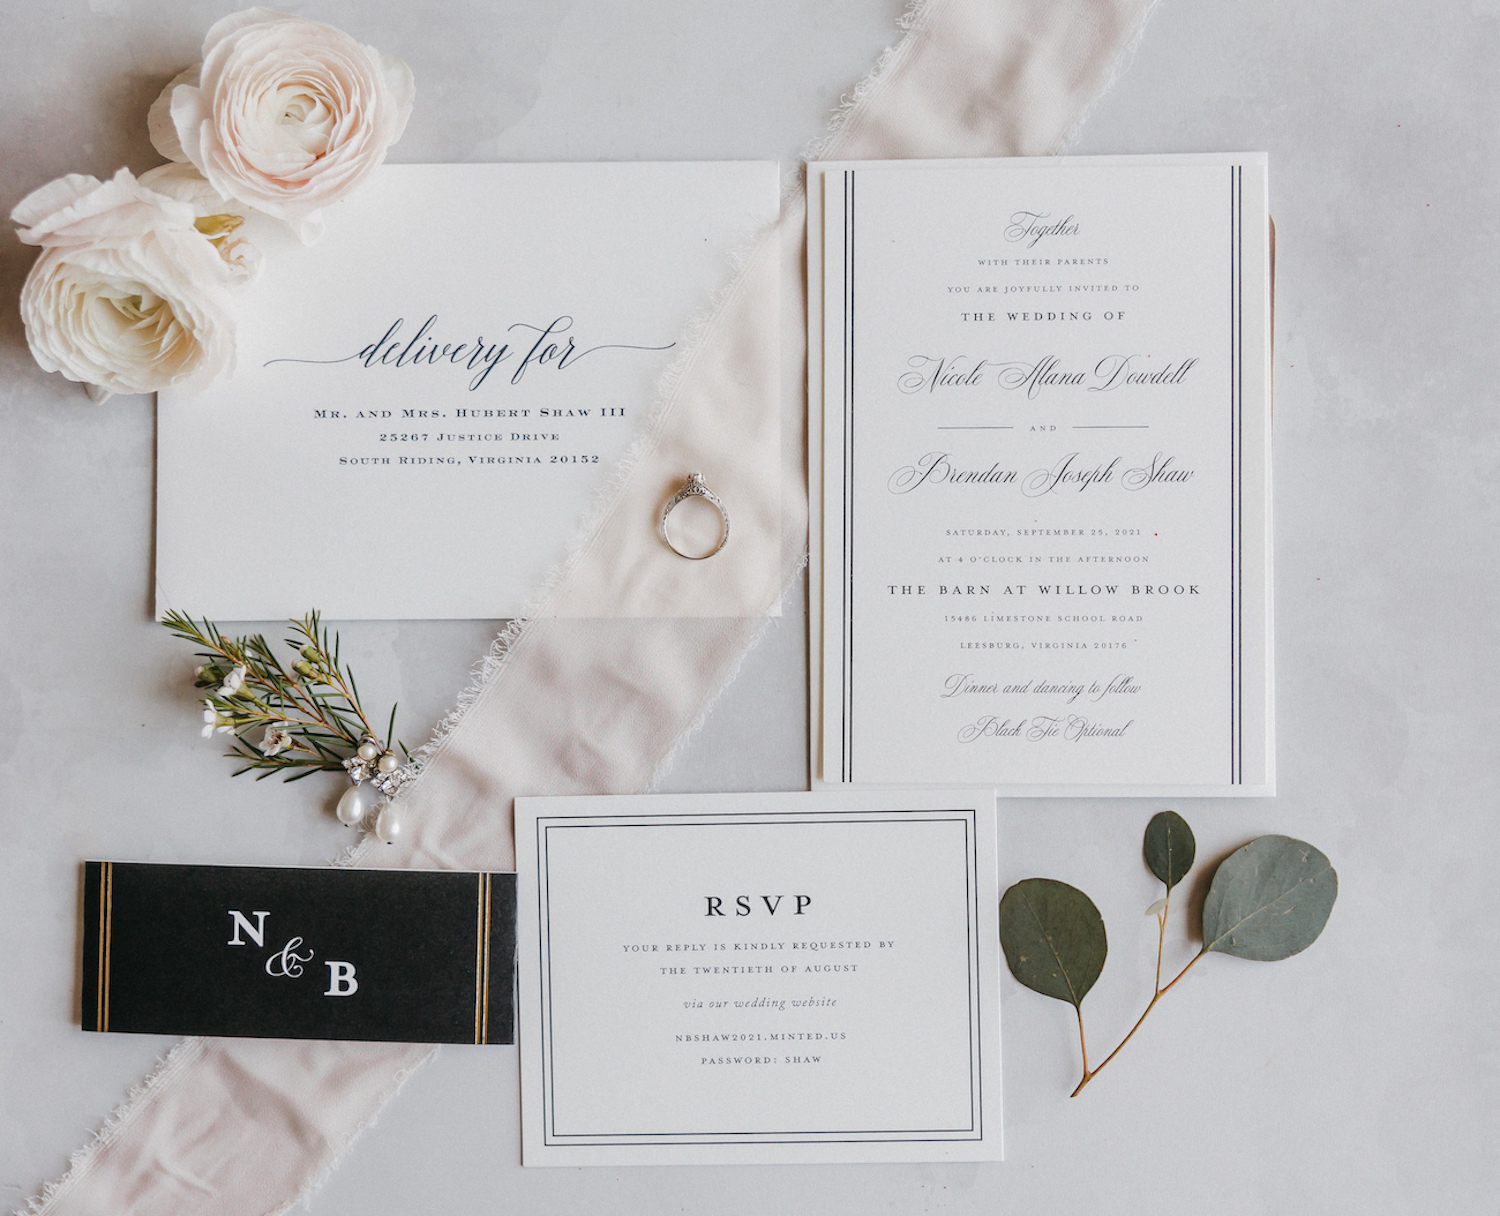 Flat-lay shot of wedding invitations and cards placed beside flowers and plants with a ring in the center, captured by Rachel Yearick Photography